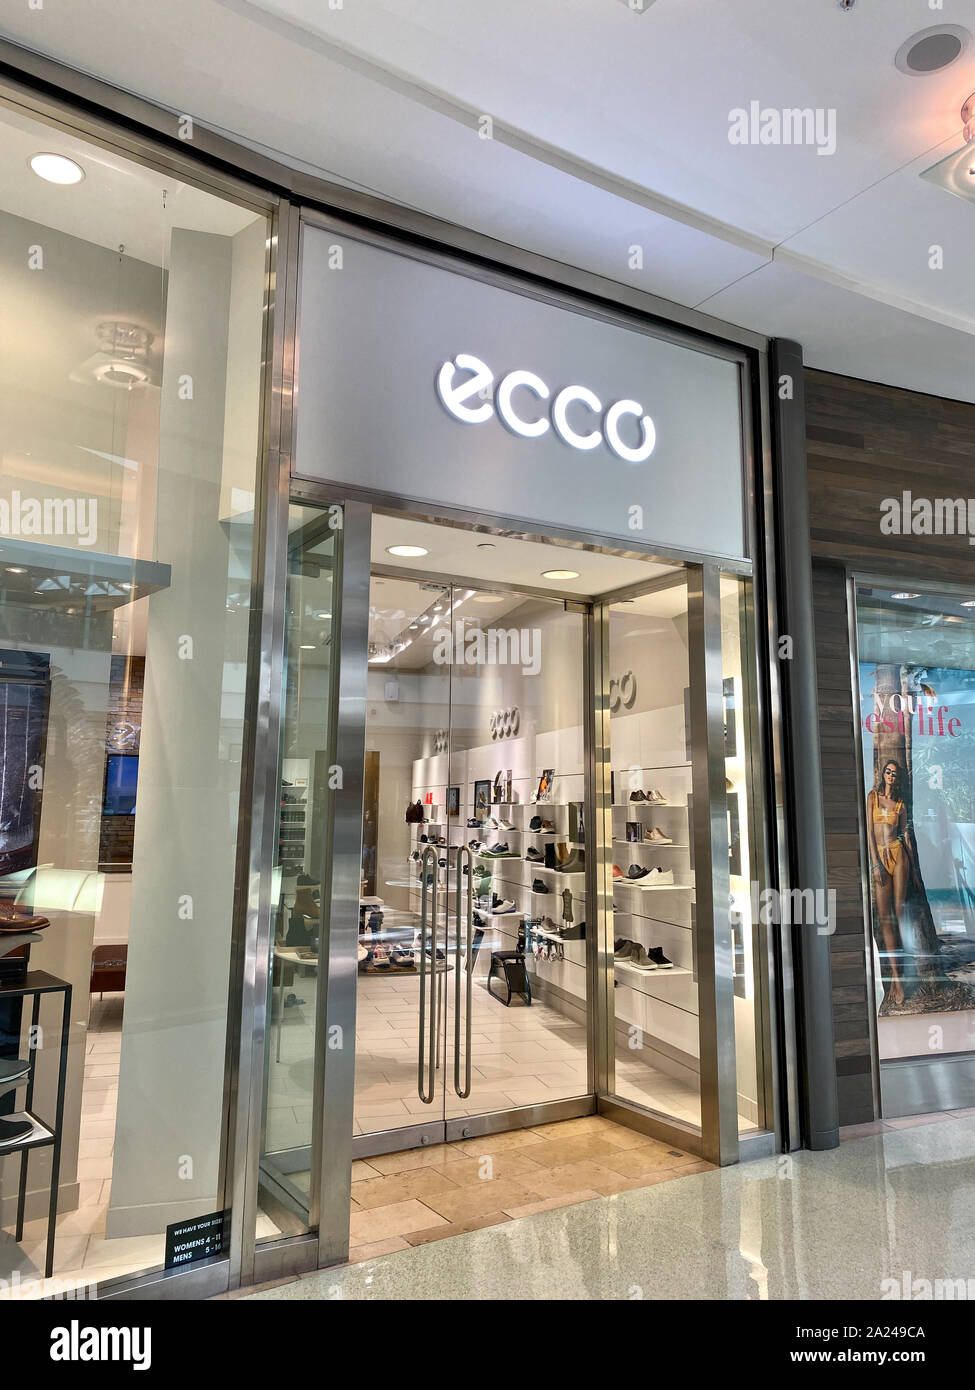 Orlando,FL/USA-9/30/19: An Ecco retail store in an indoor mall. ECCO is an  international Danish shoe manufacturer and retailer Stock Photo - Alamy